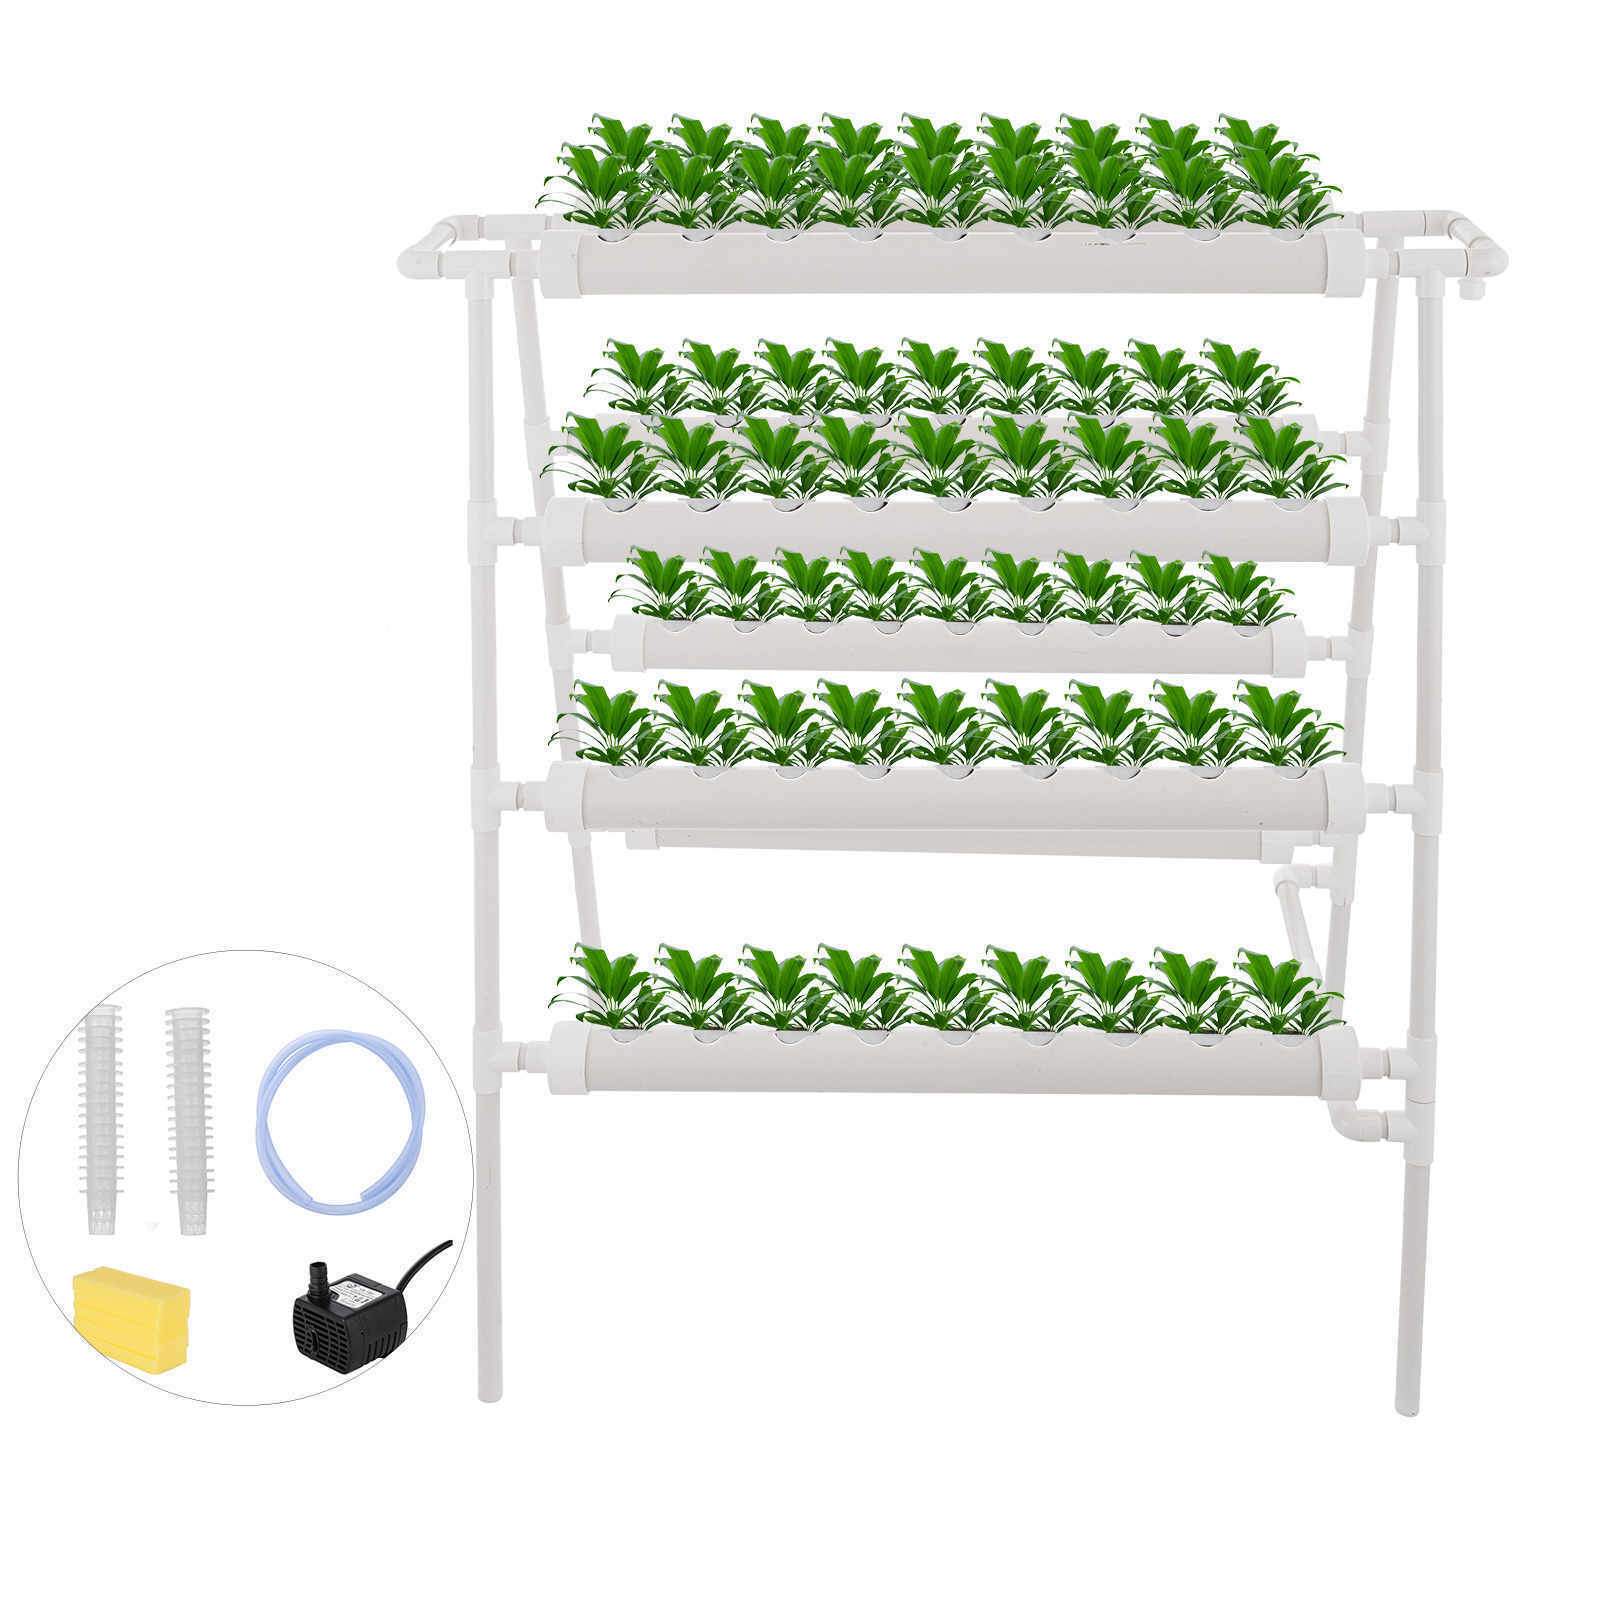 ECO Farm 4 Layers 8 Pipes 72 Plant Sites Hydroponic Growing System-growpackage.com